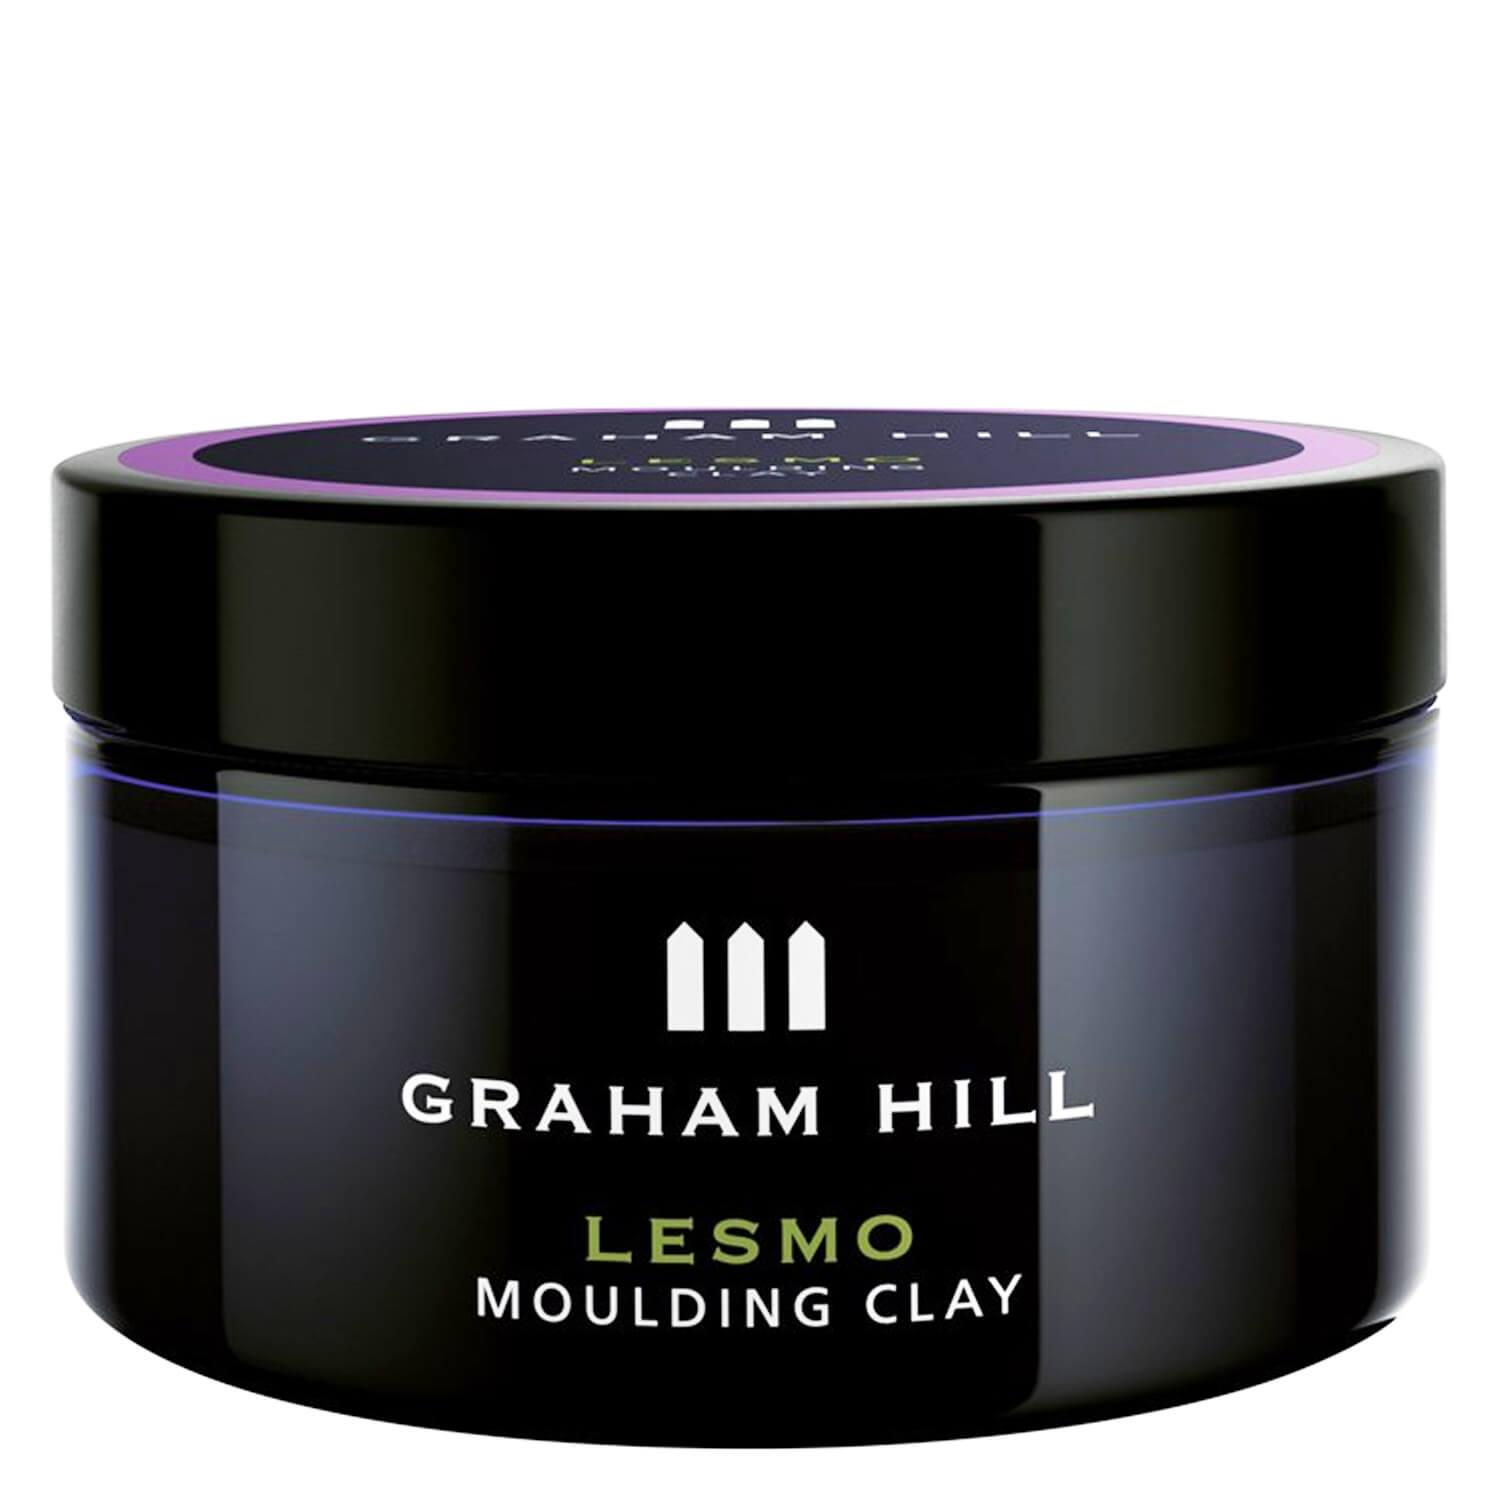 Styling & Grooming - Lesmo Moulding Clay